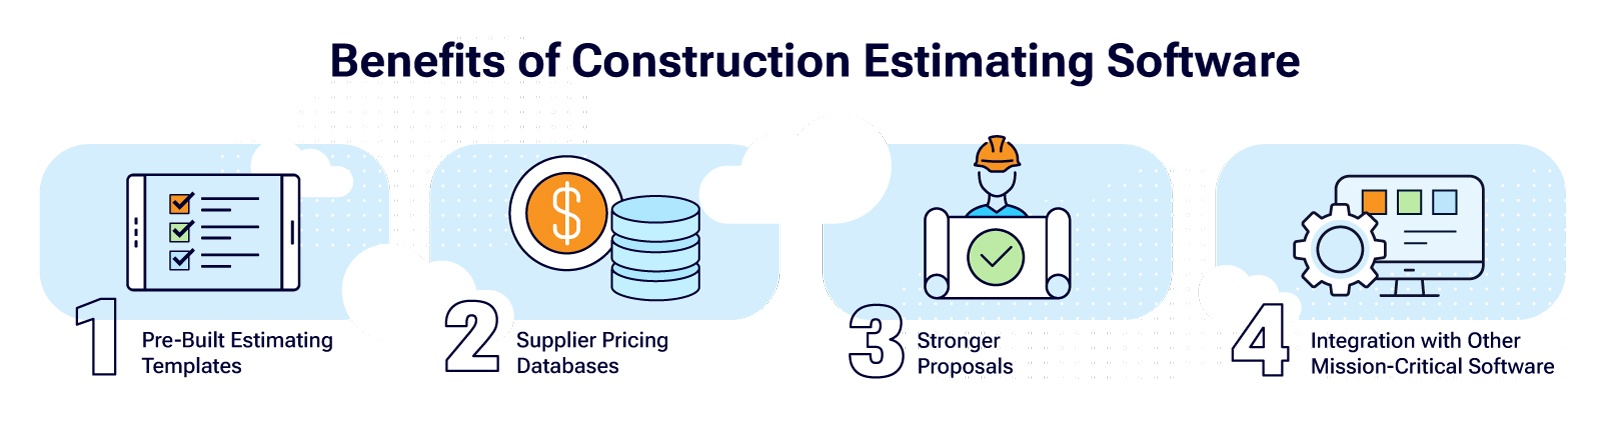 Benefits of Construction Estimating Software